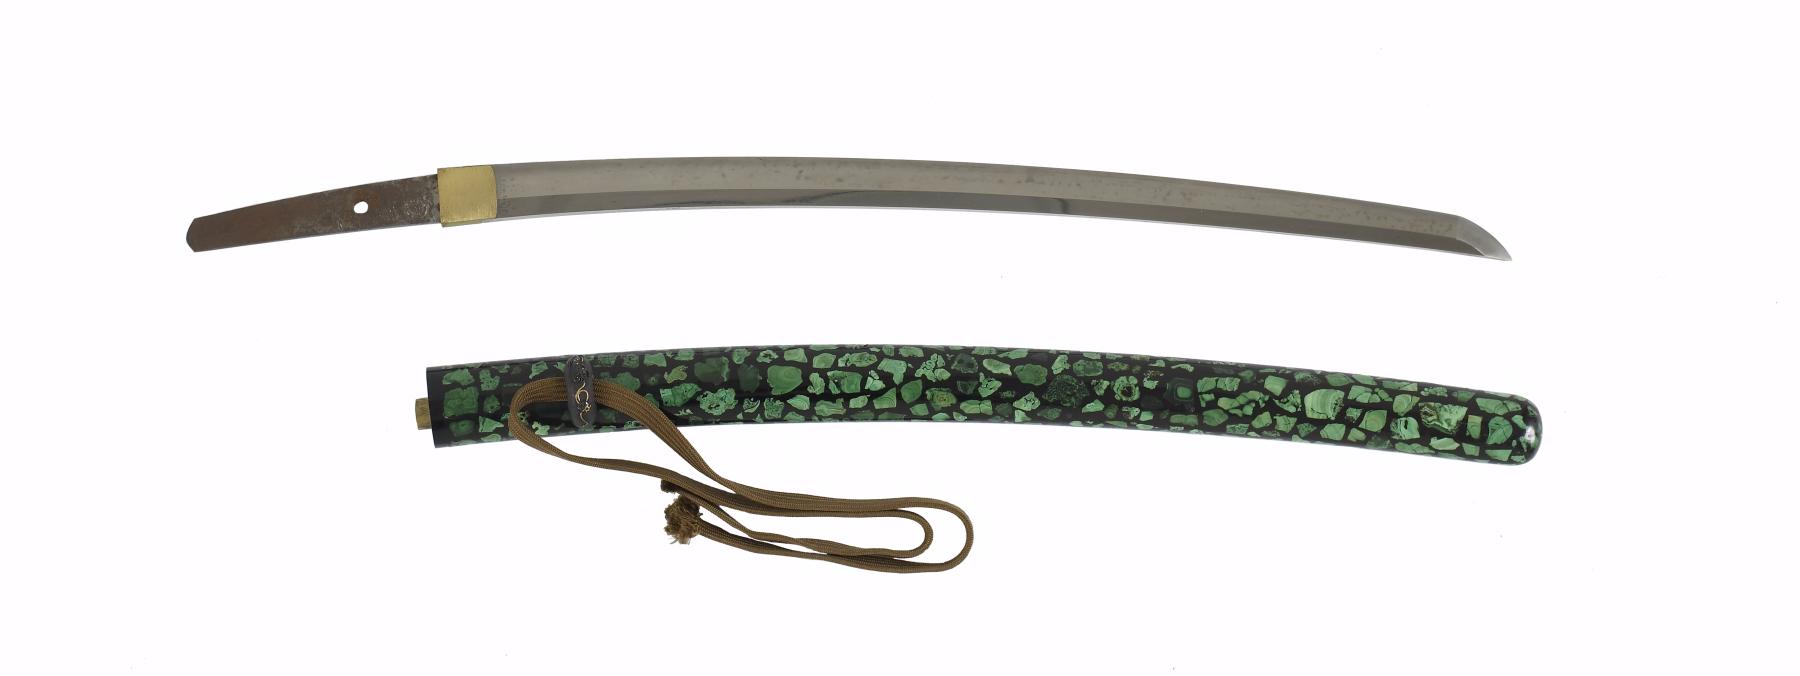 Image for Short sword (wakizashi) with black lacquer saya with malachite inlay (includes 51.1252.1-51.1252.4)